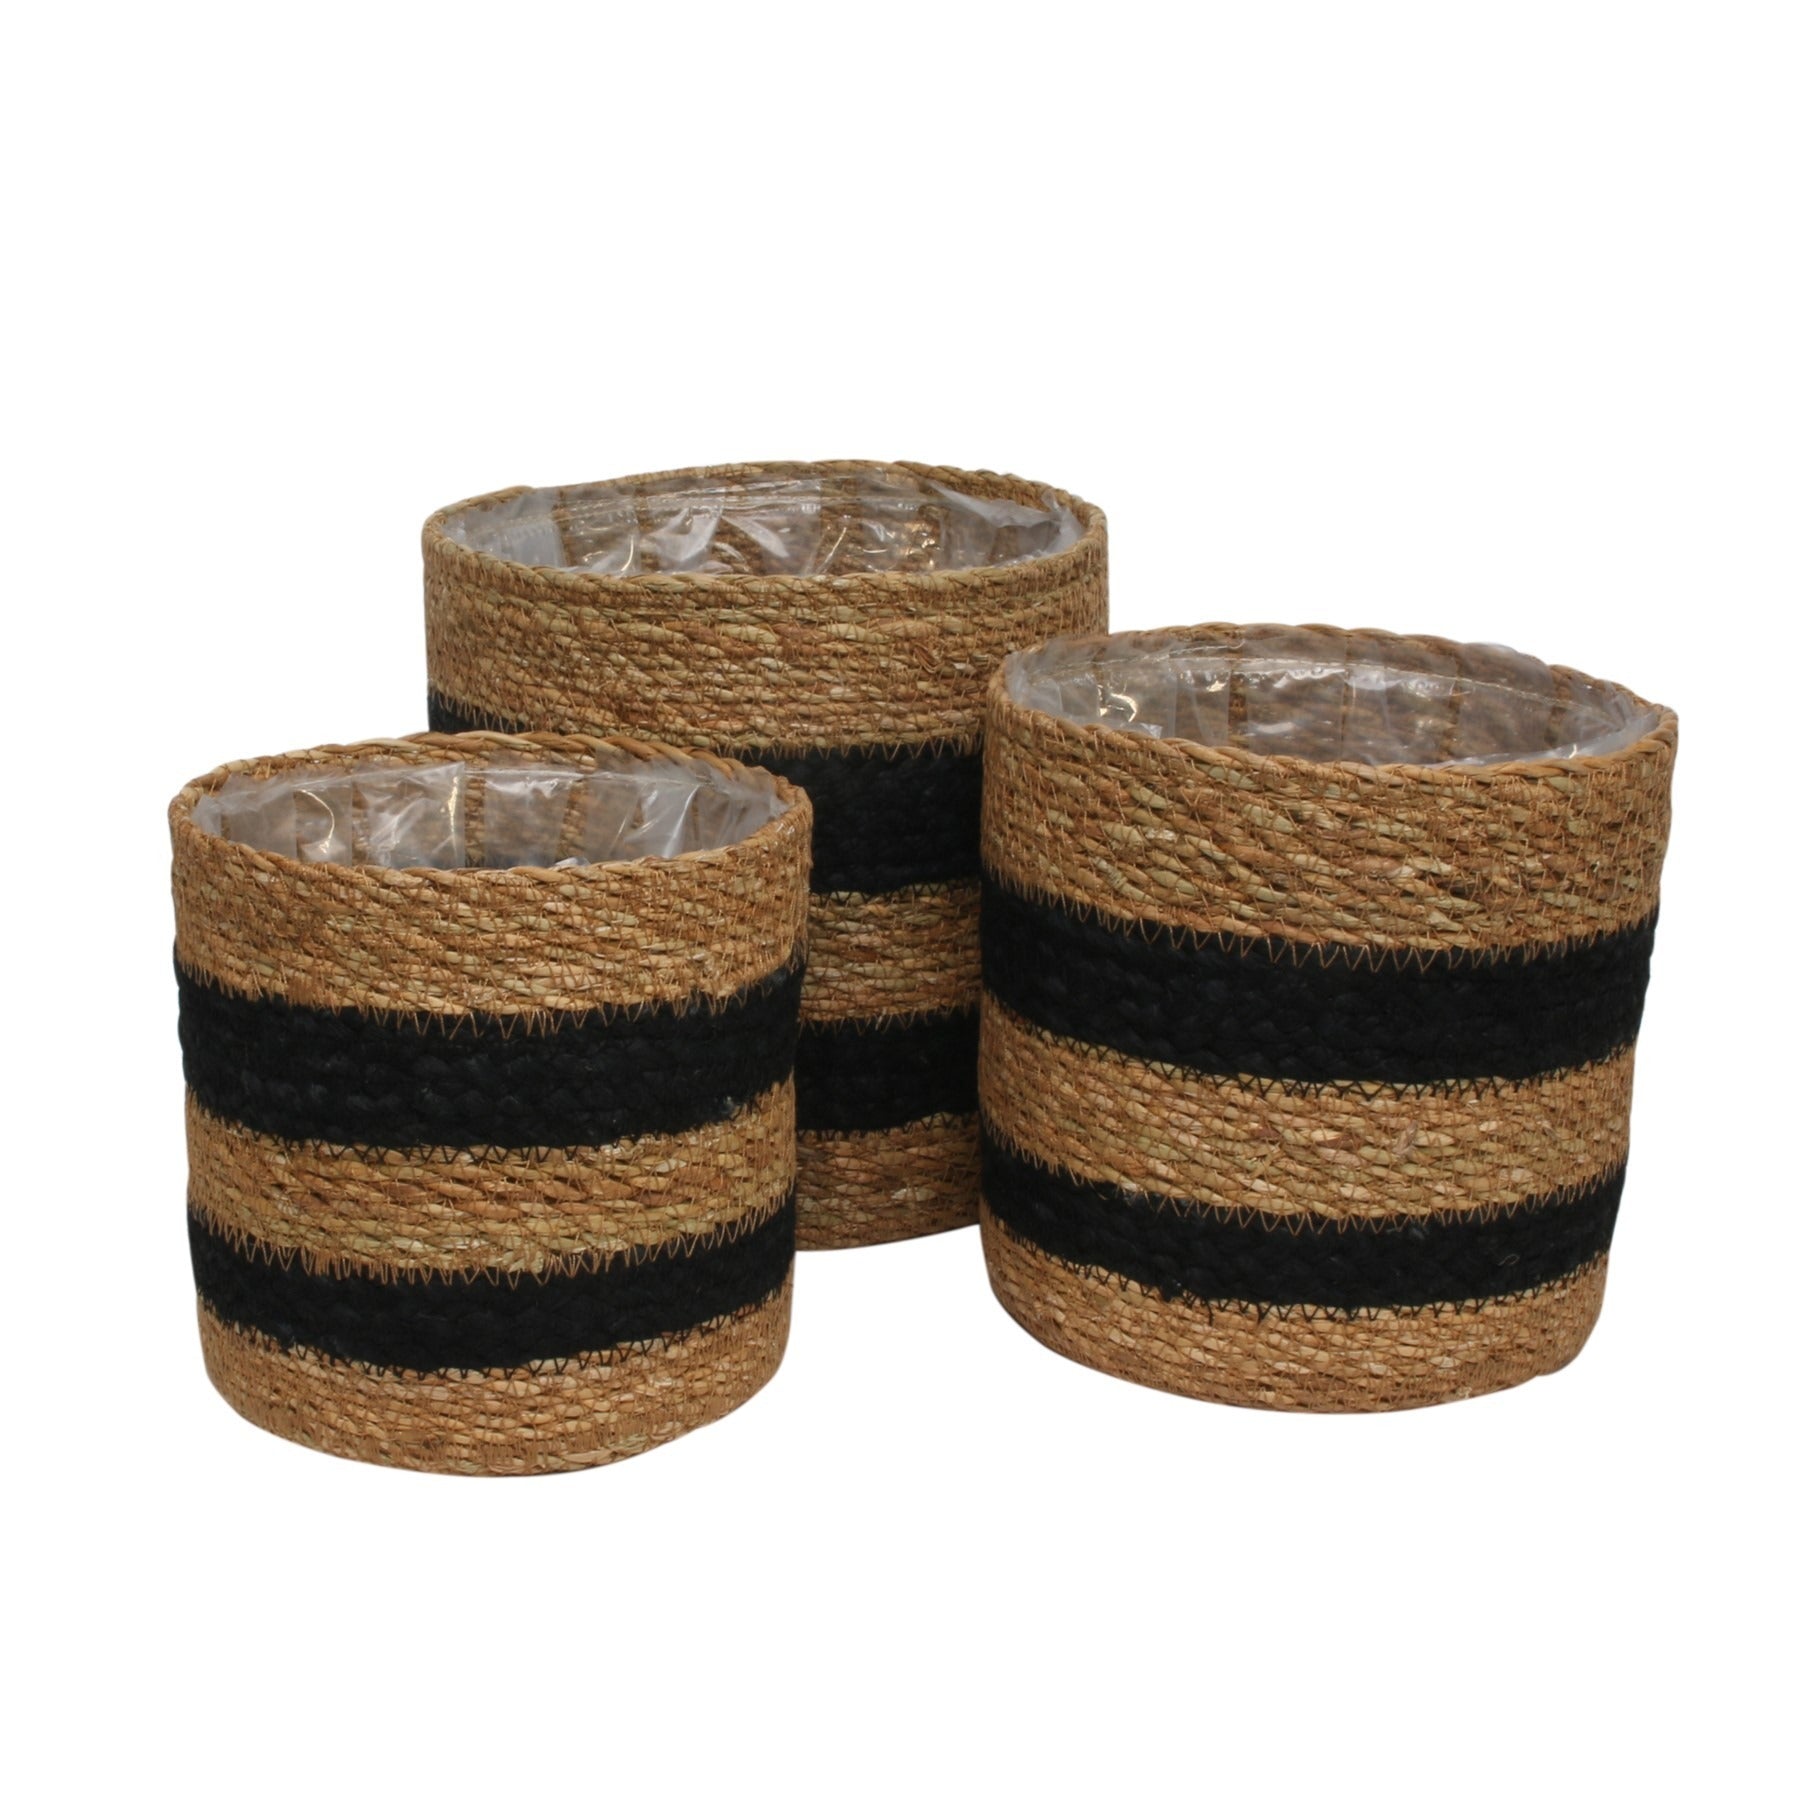 View Striped Seagrass Baskets with Liner Set of 3 information